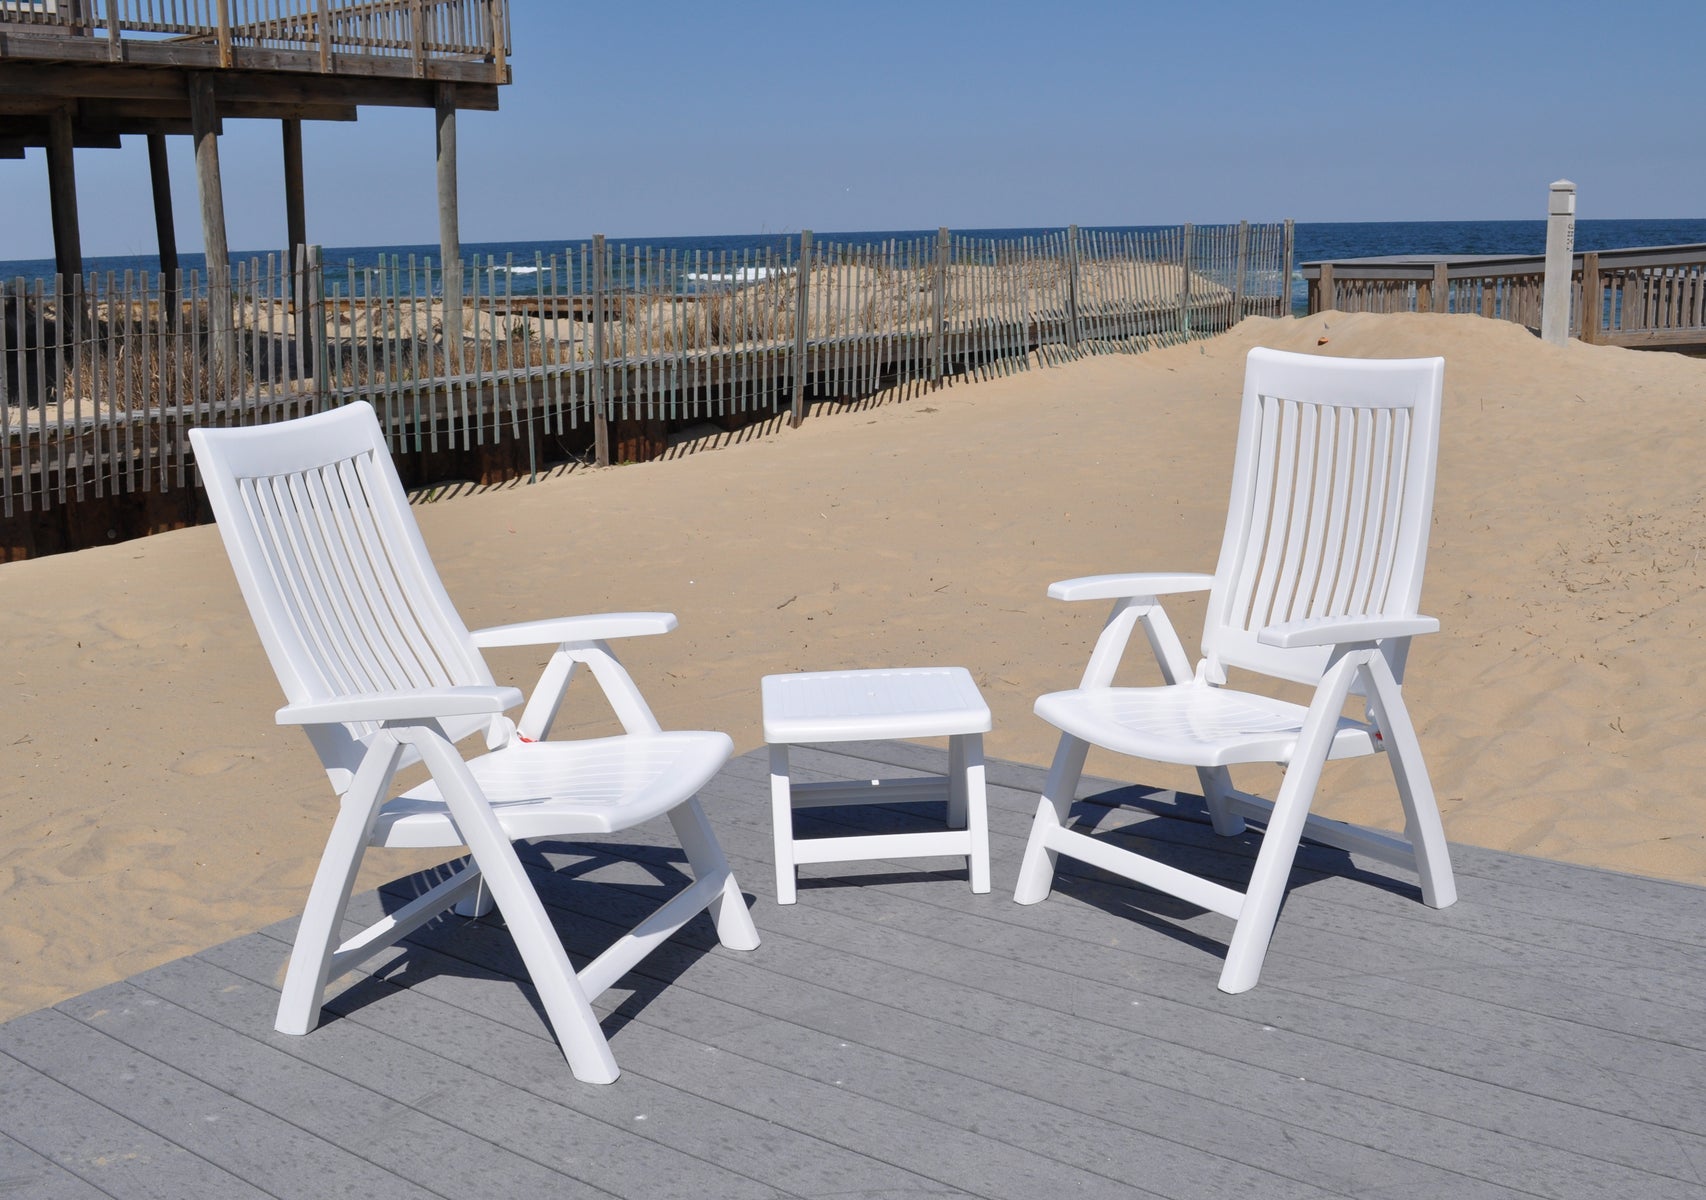 KETTLER Resin folding chairs and side table. Kettler Roma Resin Patio Furniture